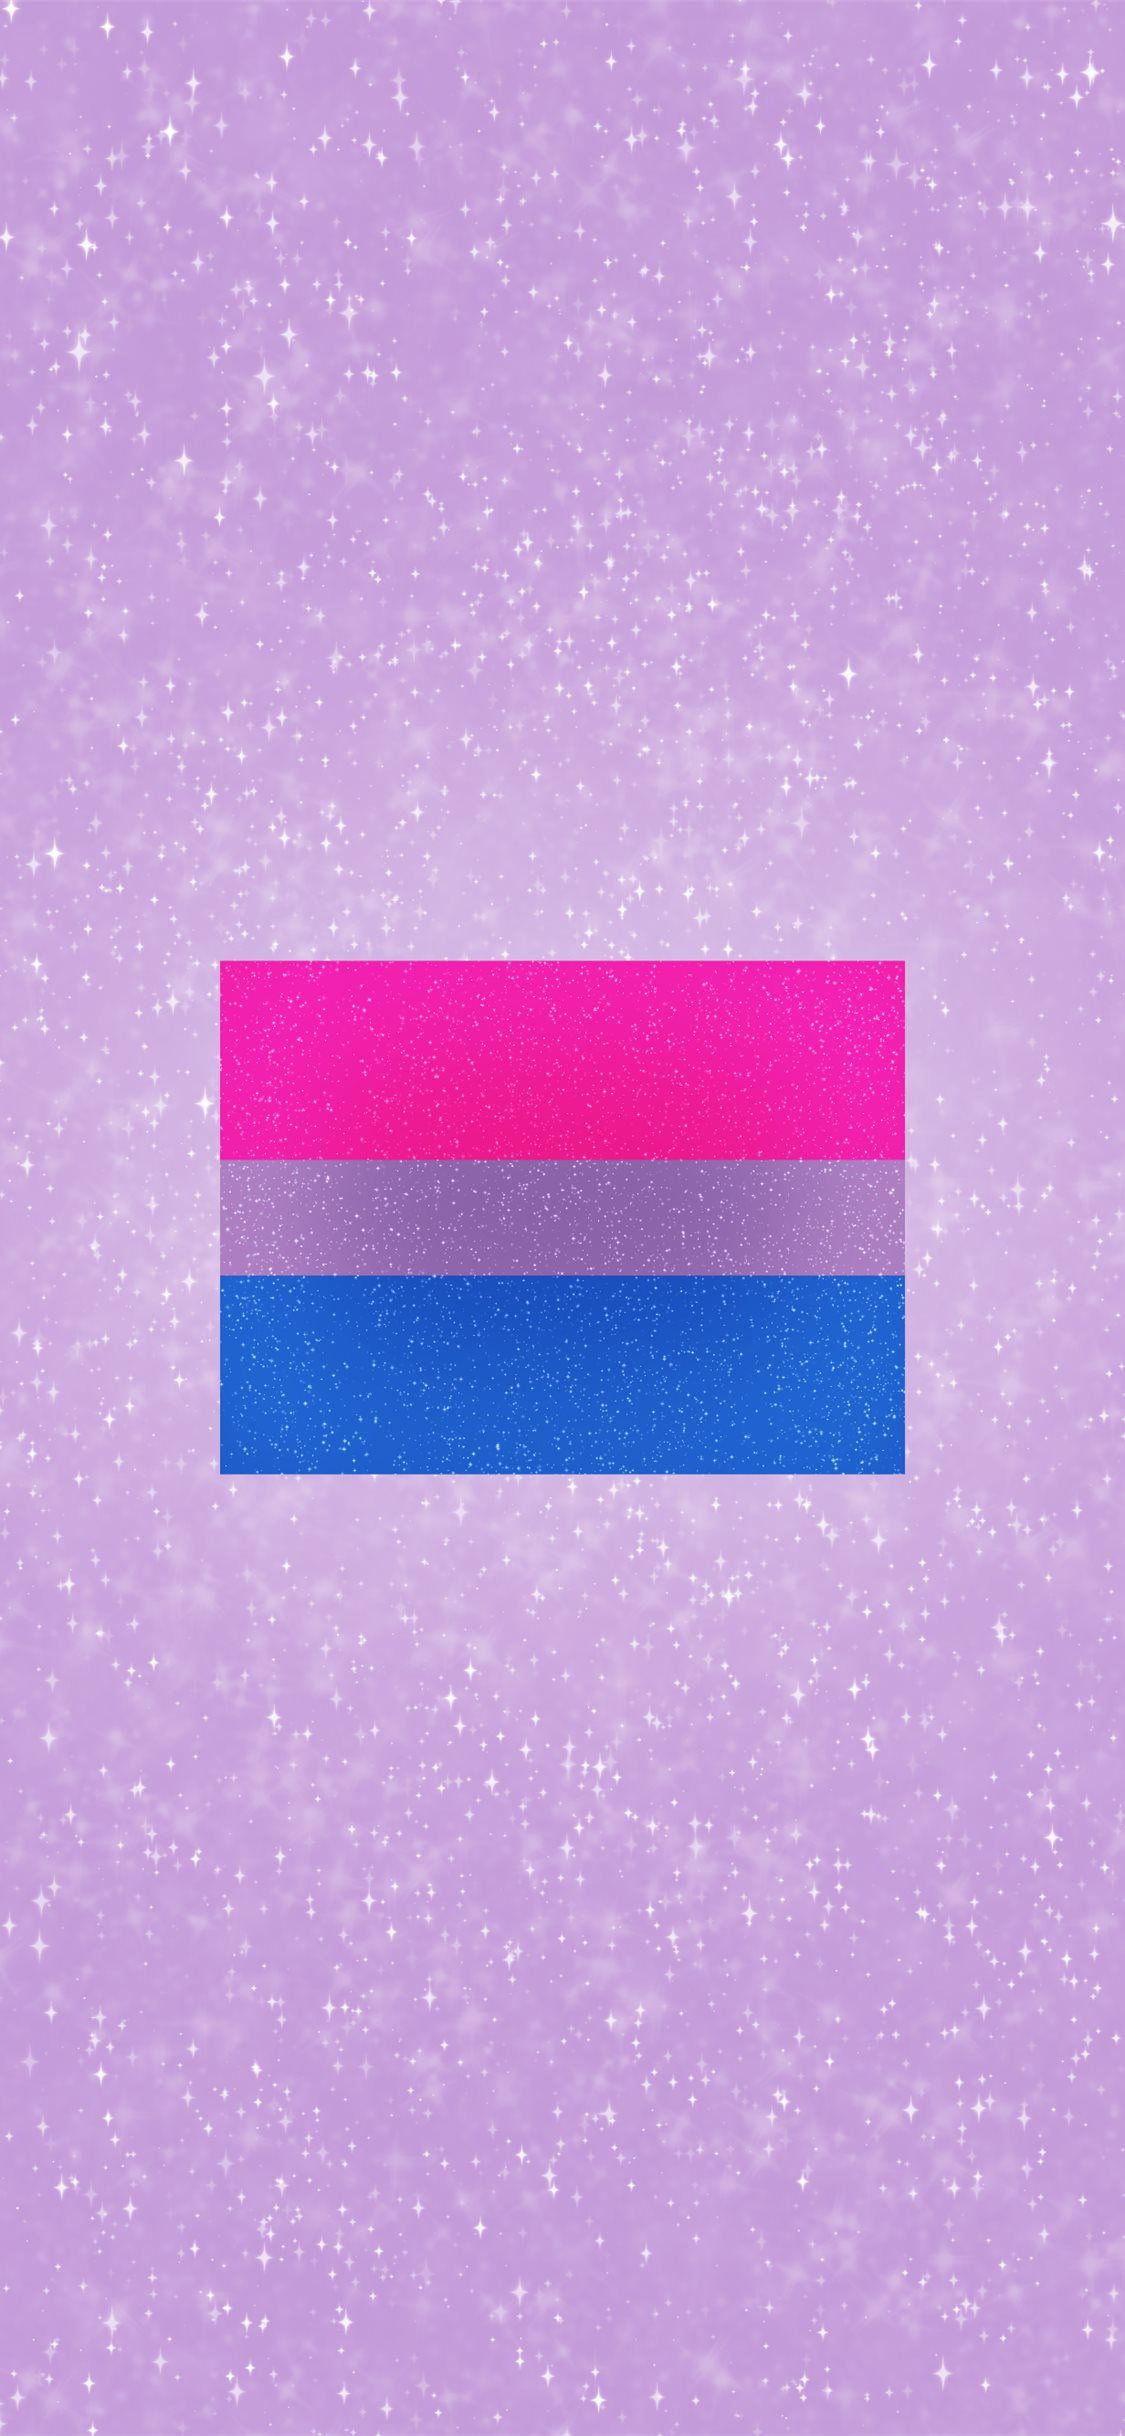 A pride flag for bisexuality on a sparkly background - Pride, bisexual